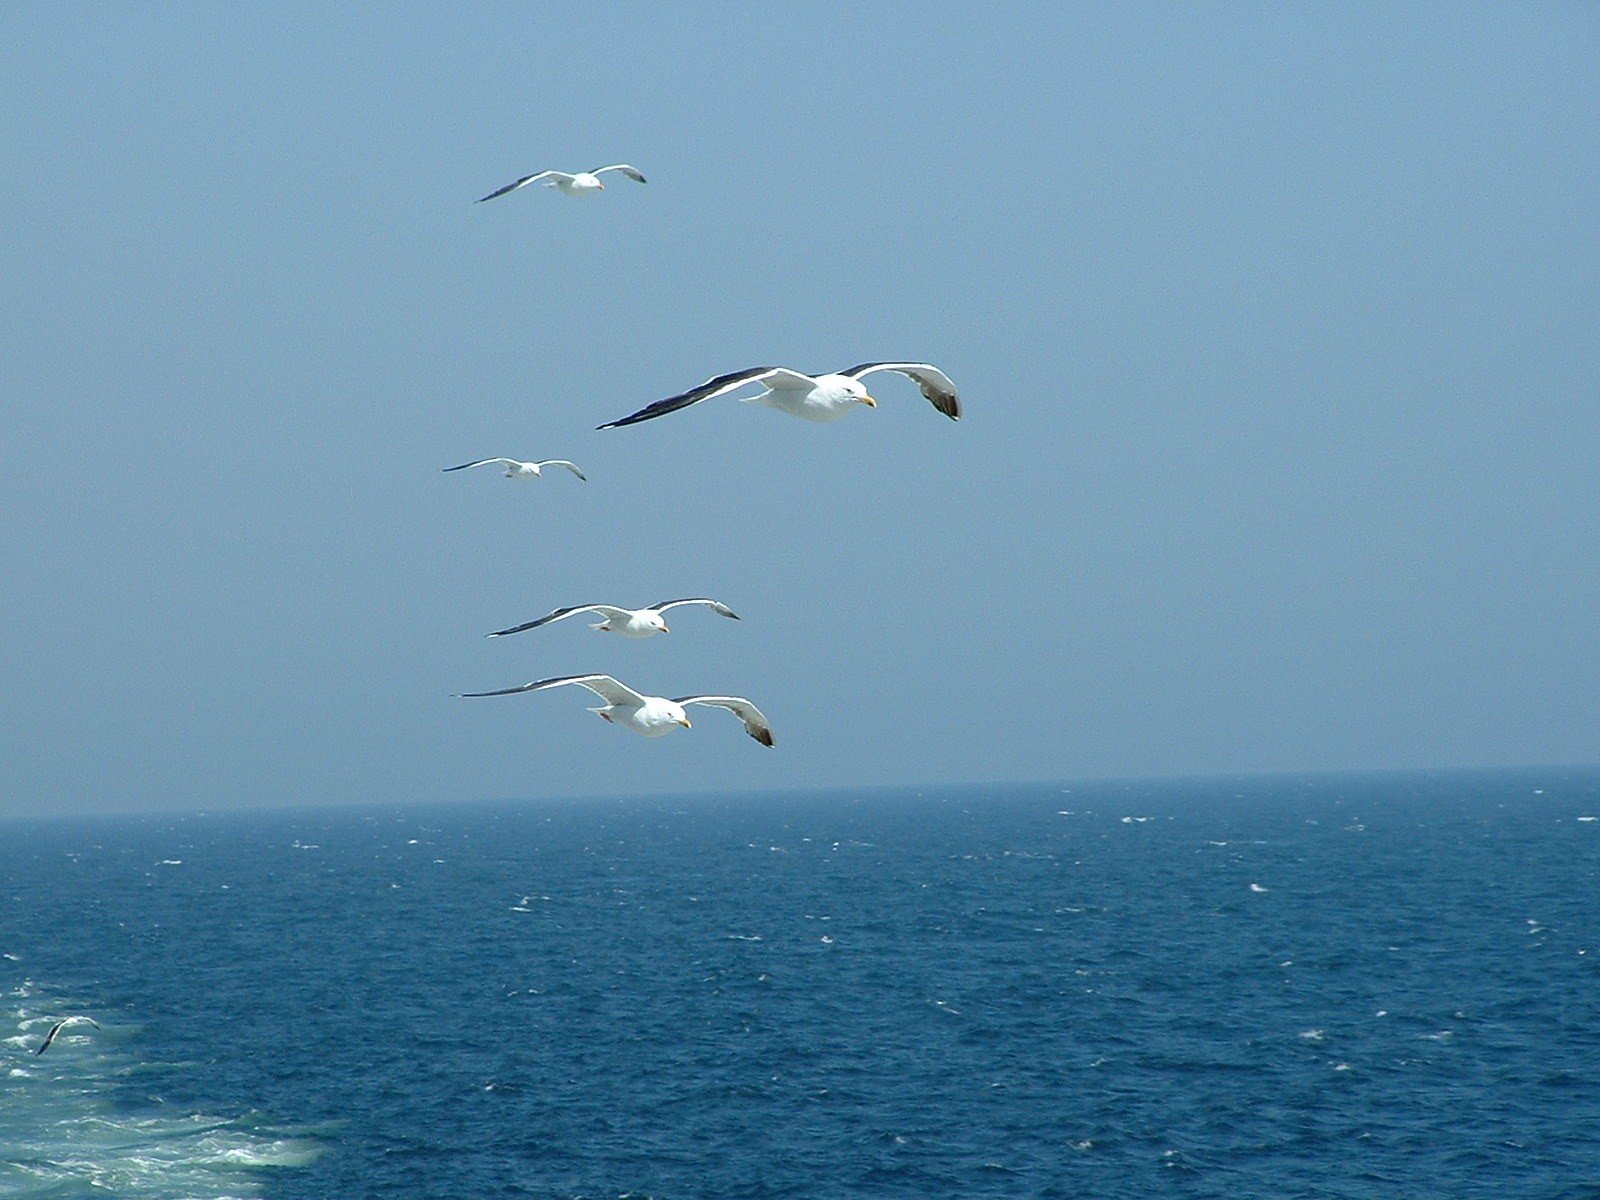 nature, Flying, Birds, Animals, Seagulls, Skyscapes, Sea Wallpaper